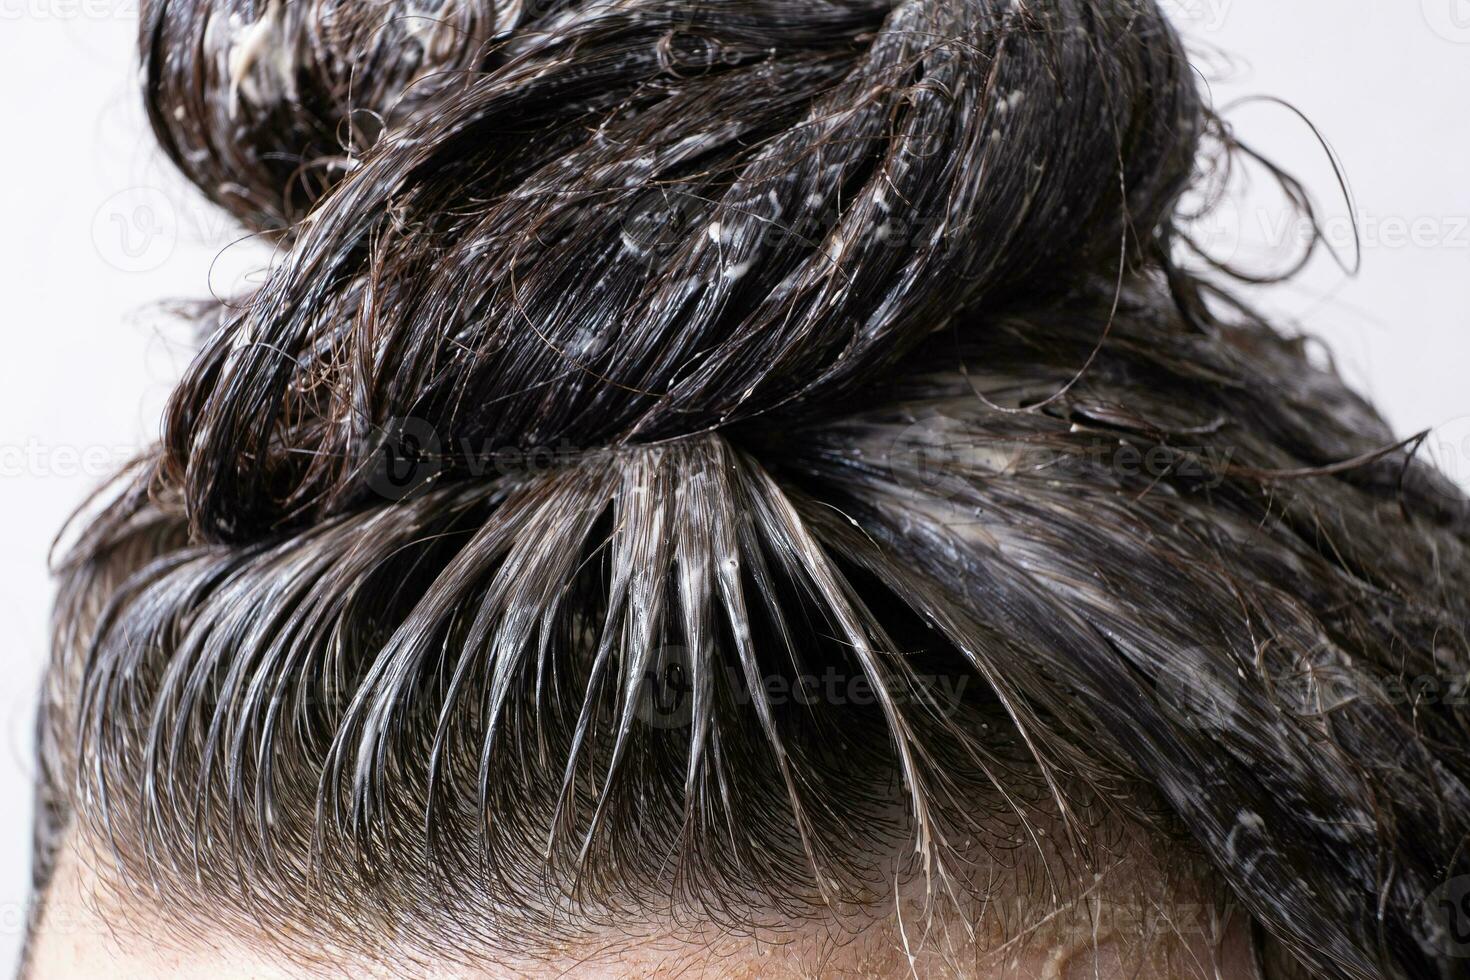 Close up women's hair is collected in a bun with paint applied to it. Hair dyeing concept photo